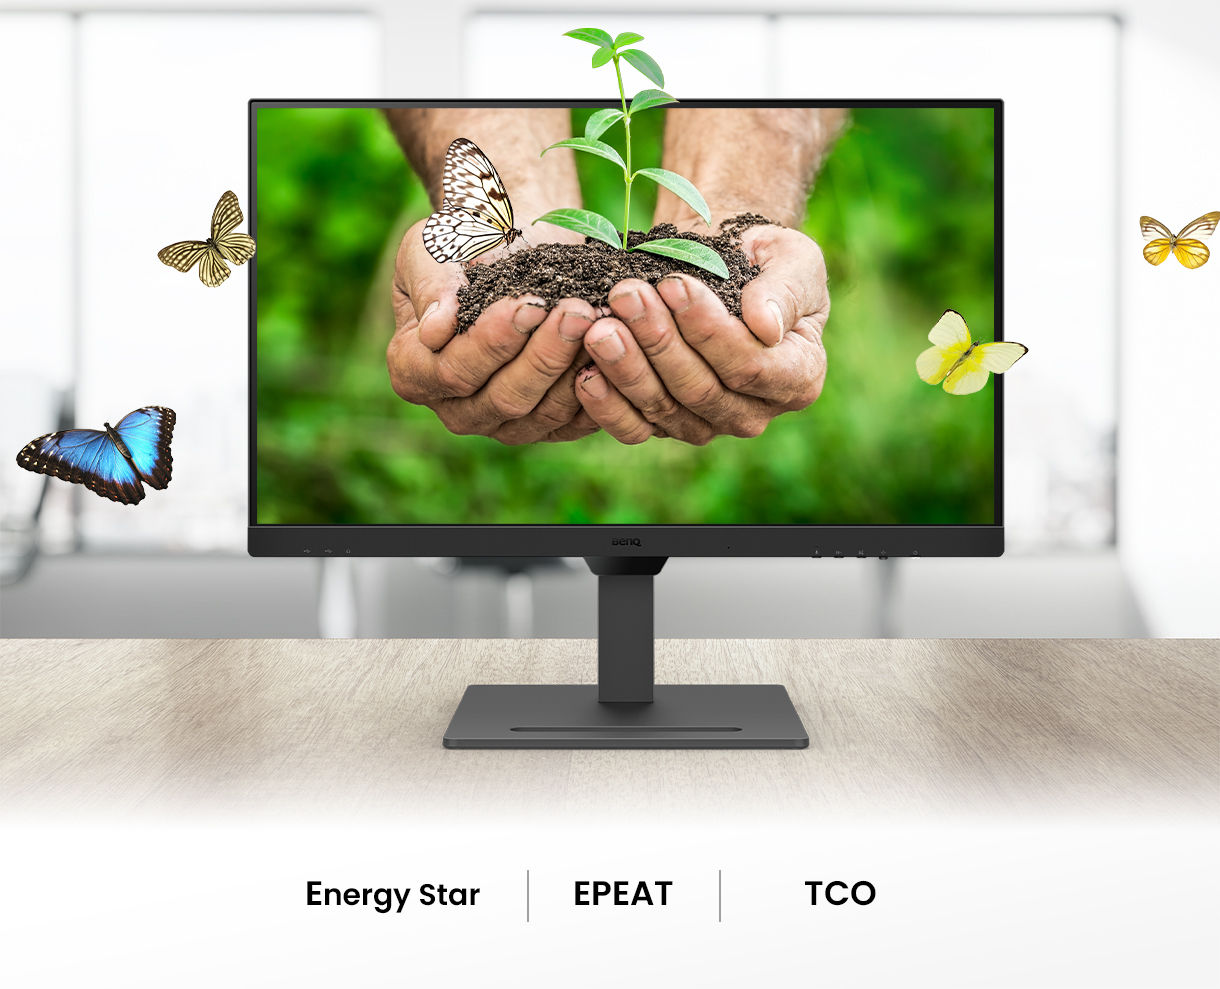 BenQ BL series is Energy Star, EPEAT, and TCO certified to facilitate environmentally- friendly purchasing decisions for business, institutions, and the government.	